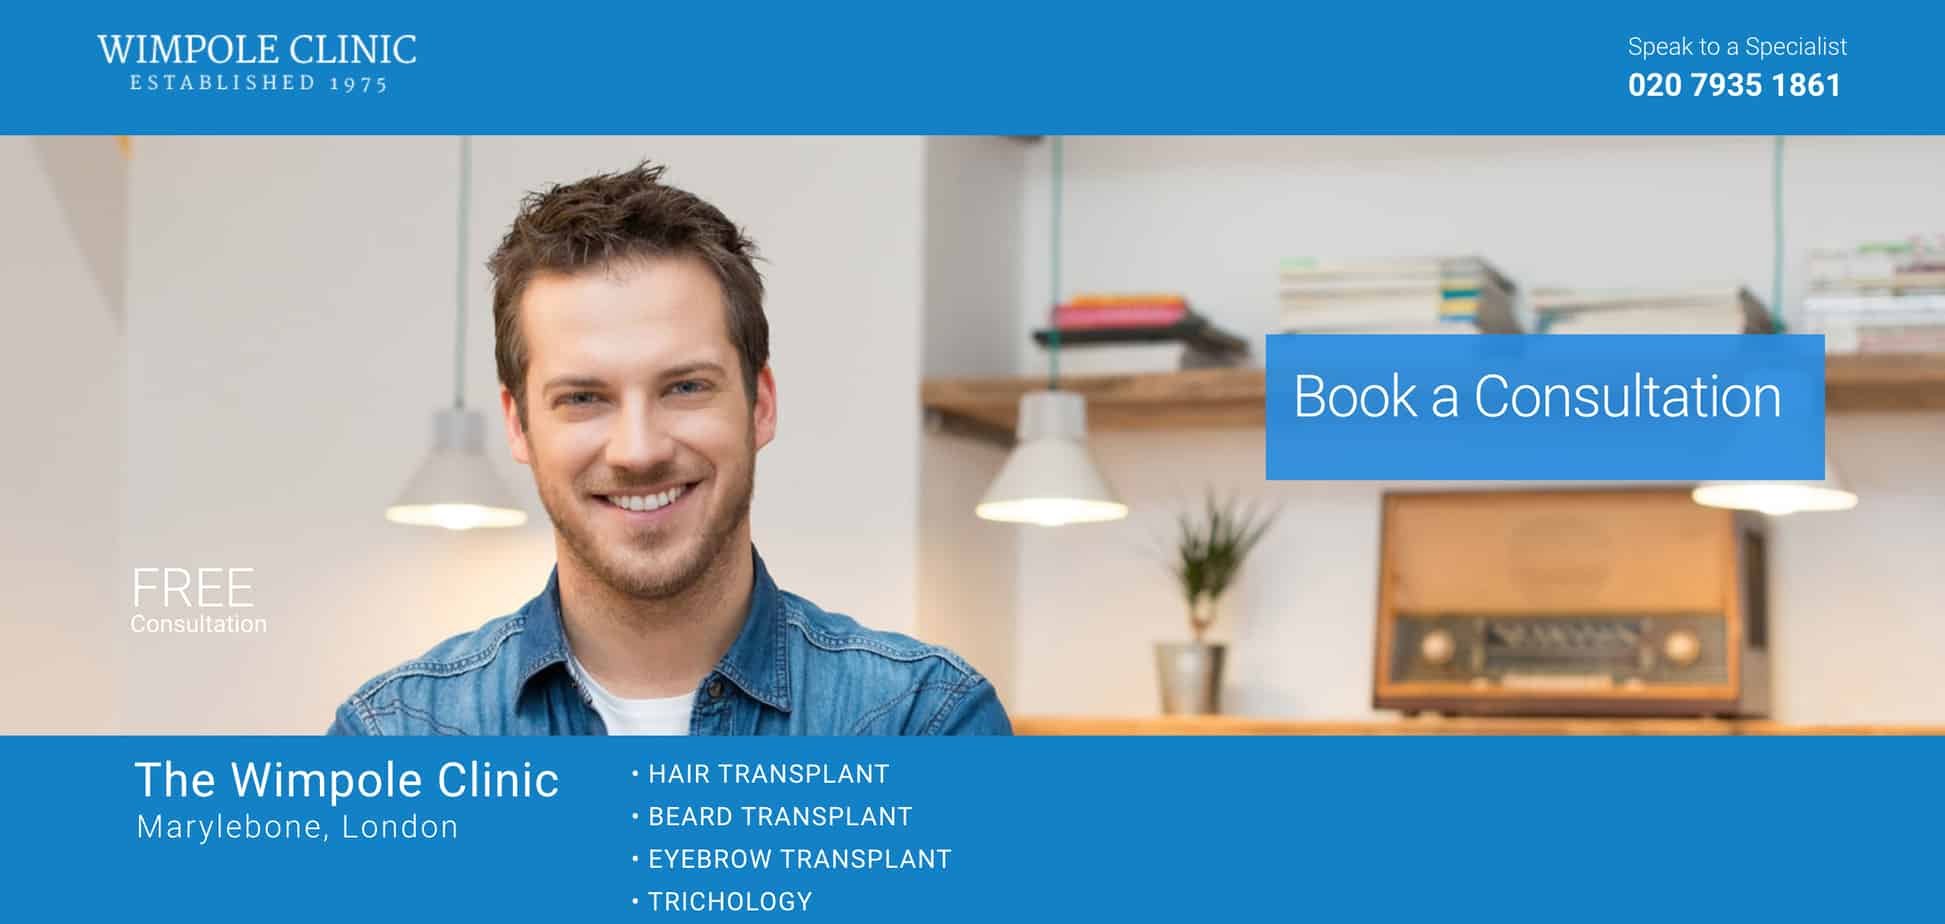 Can You Get A Hair Transplant On The NHS? | Wimpole Clinic